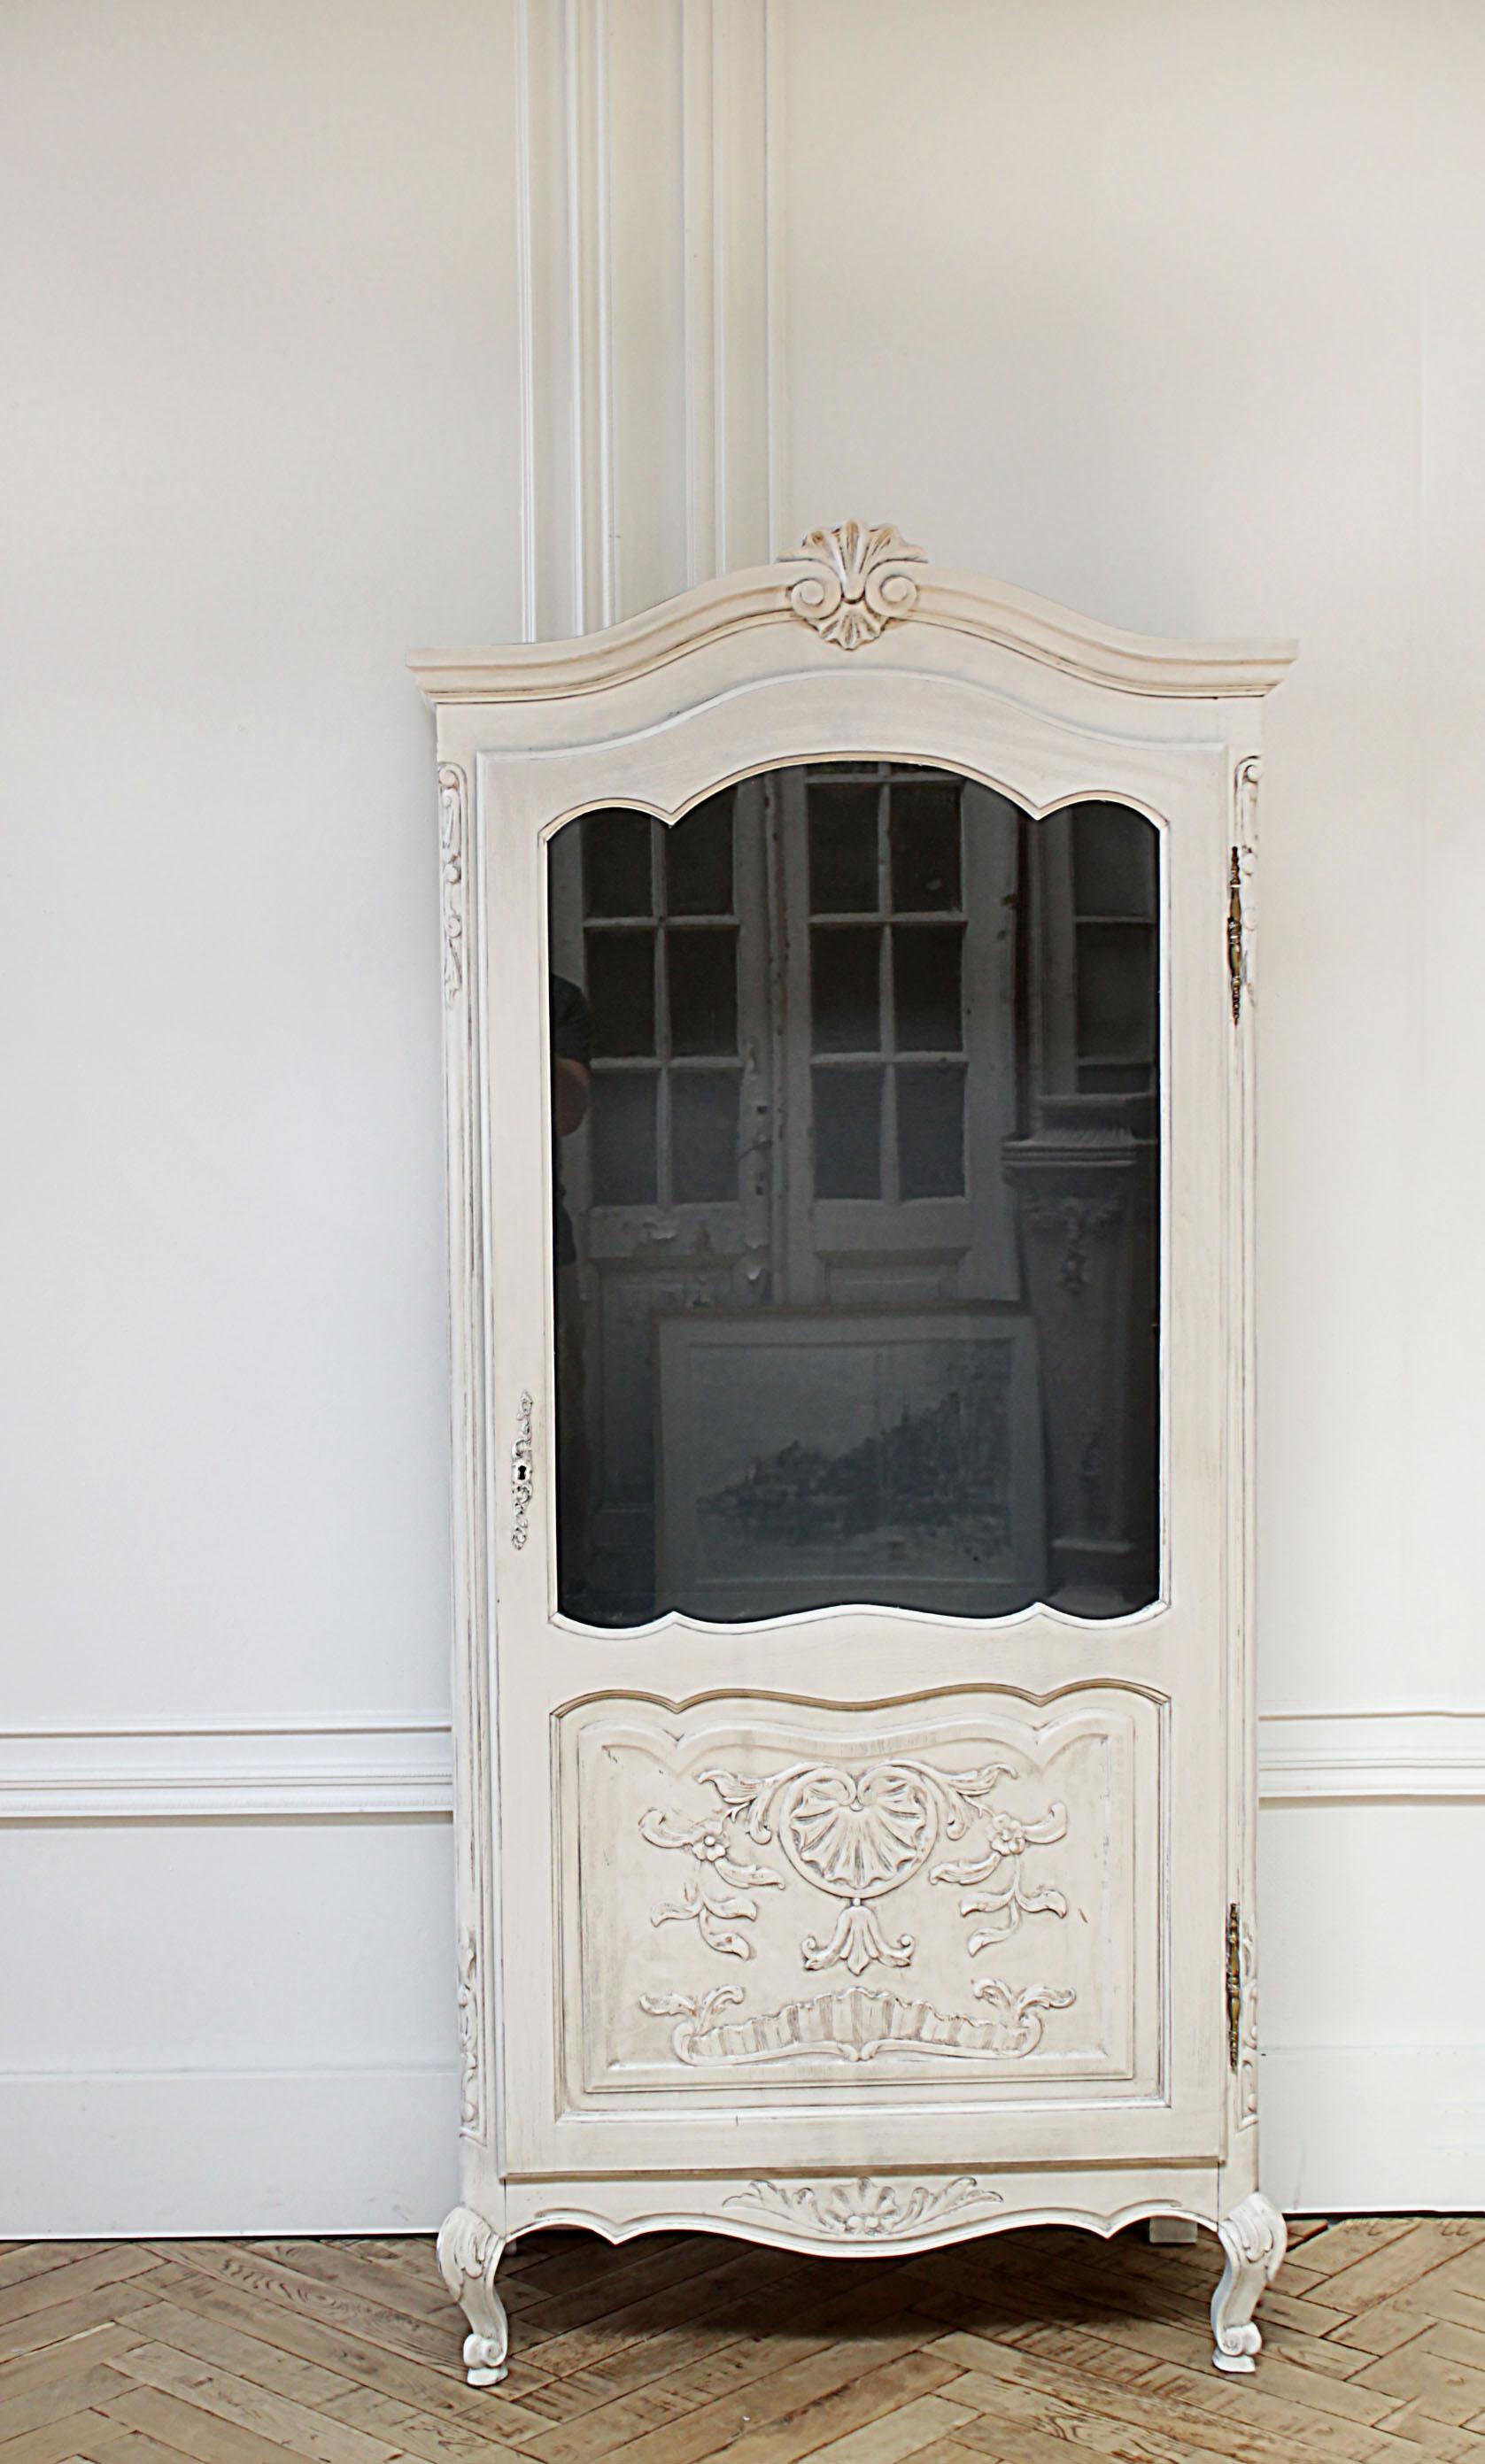 Painted Country French style display cabinet
A soft oyster white finish, with subtle distressed edges, and beautiful carved floral and shell motif.
The inside is painted in a dark grey, and has 1 fixed wood shelf, and 2 glass shelves. Door opens